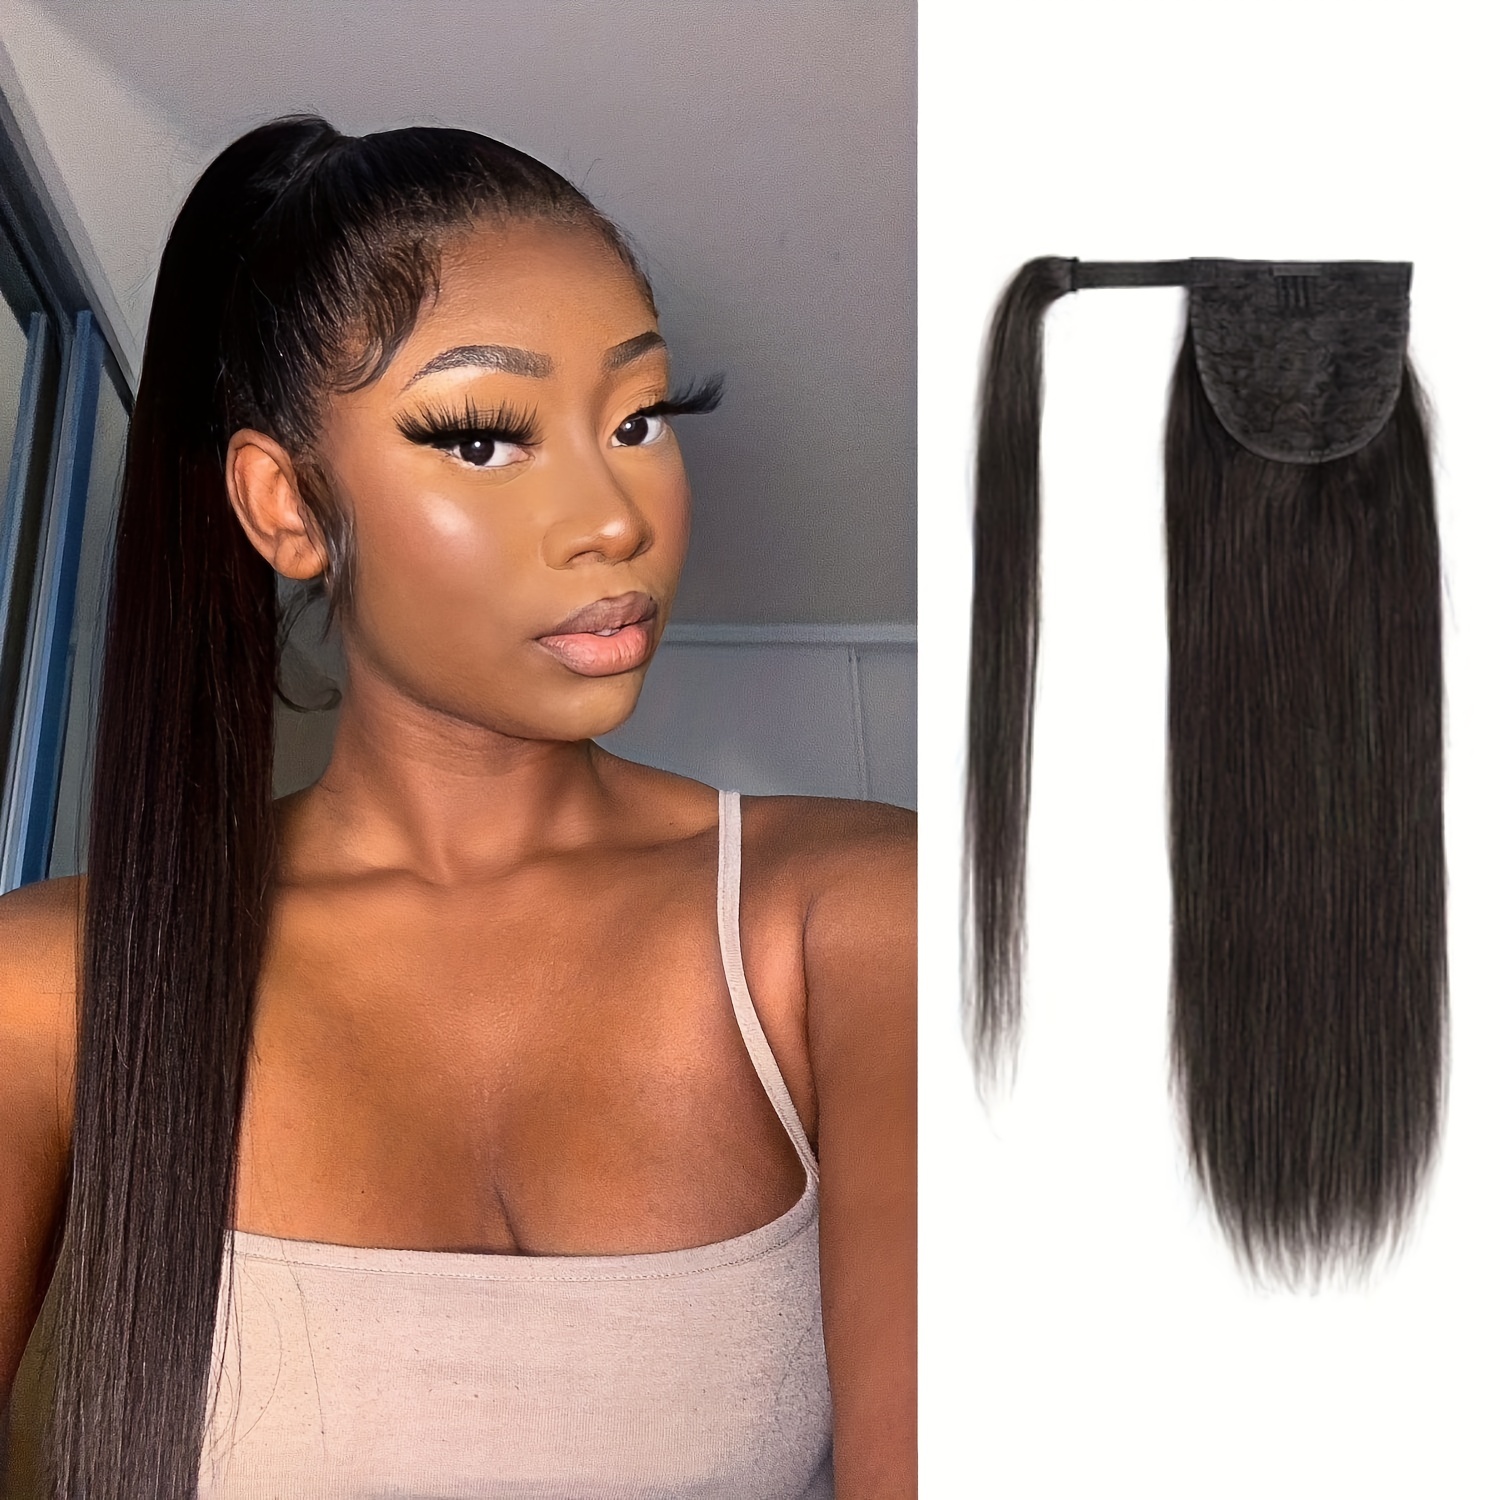 Wig Female Ponytail Wig Long Straight Hair Extension Piece Ponytail Wig Female Clip in Extensions Human Cute Girls Hairstyles Tape in Hair Extensions